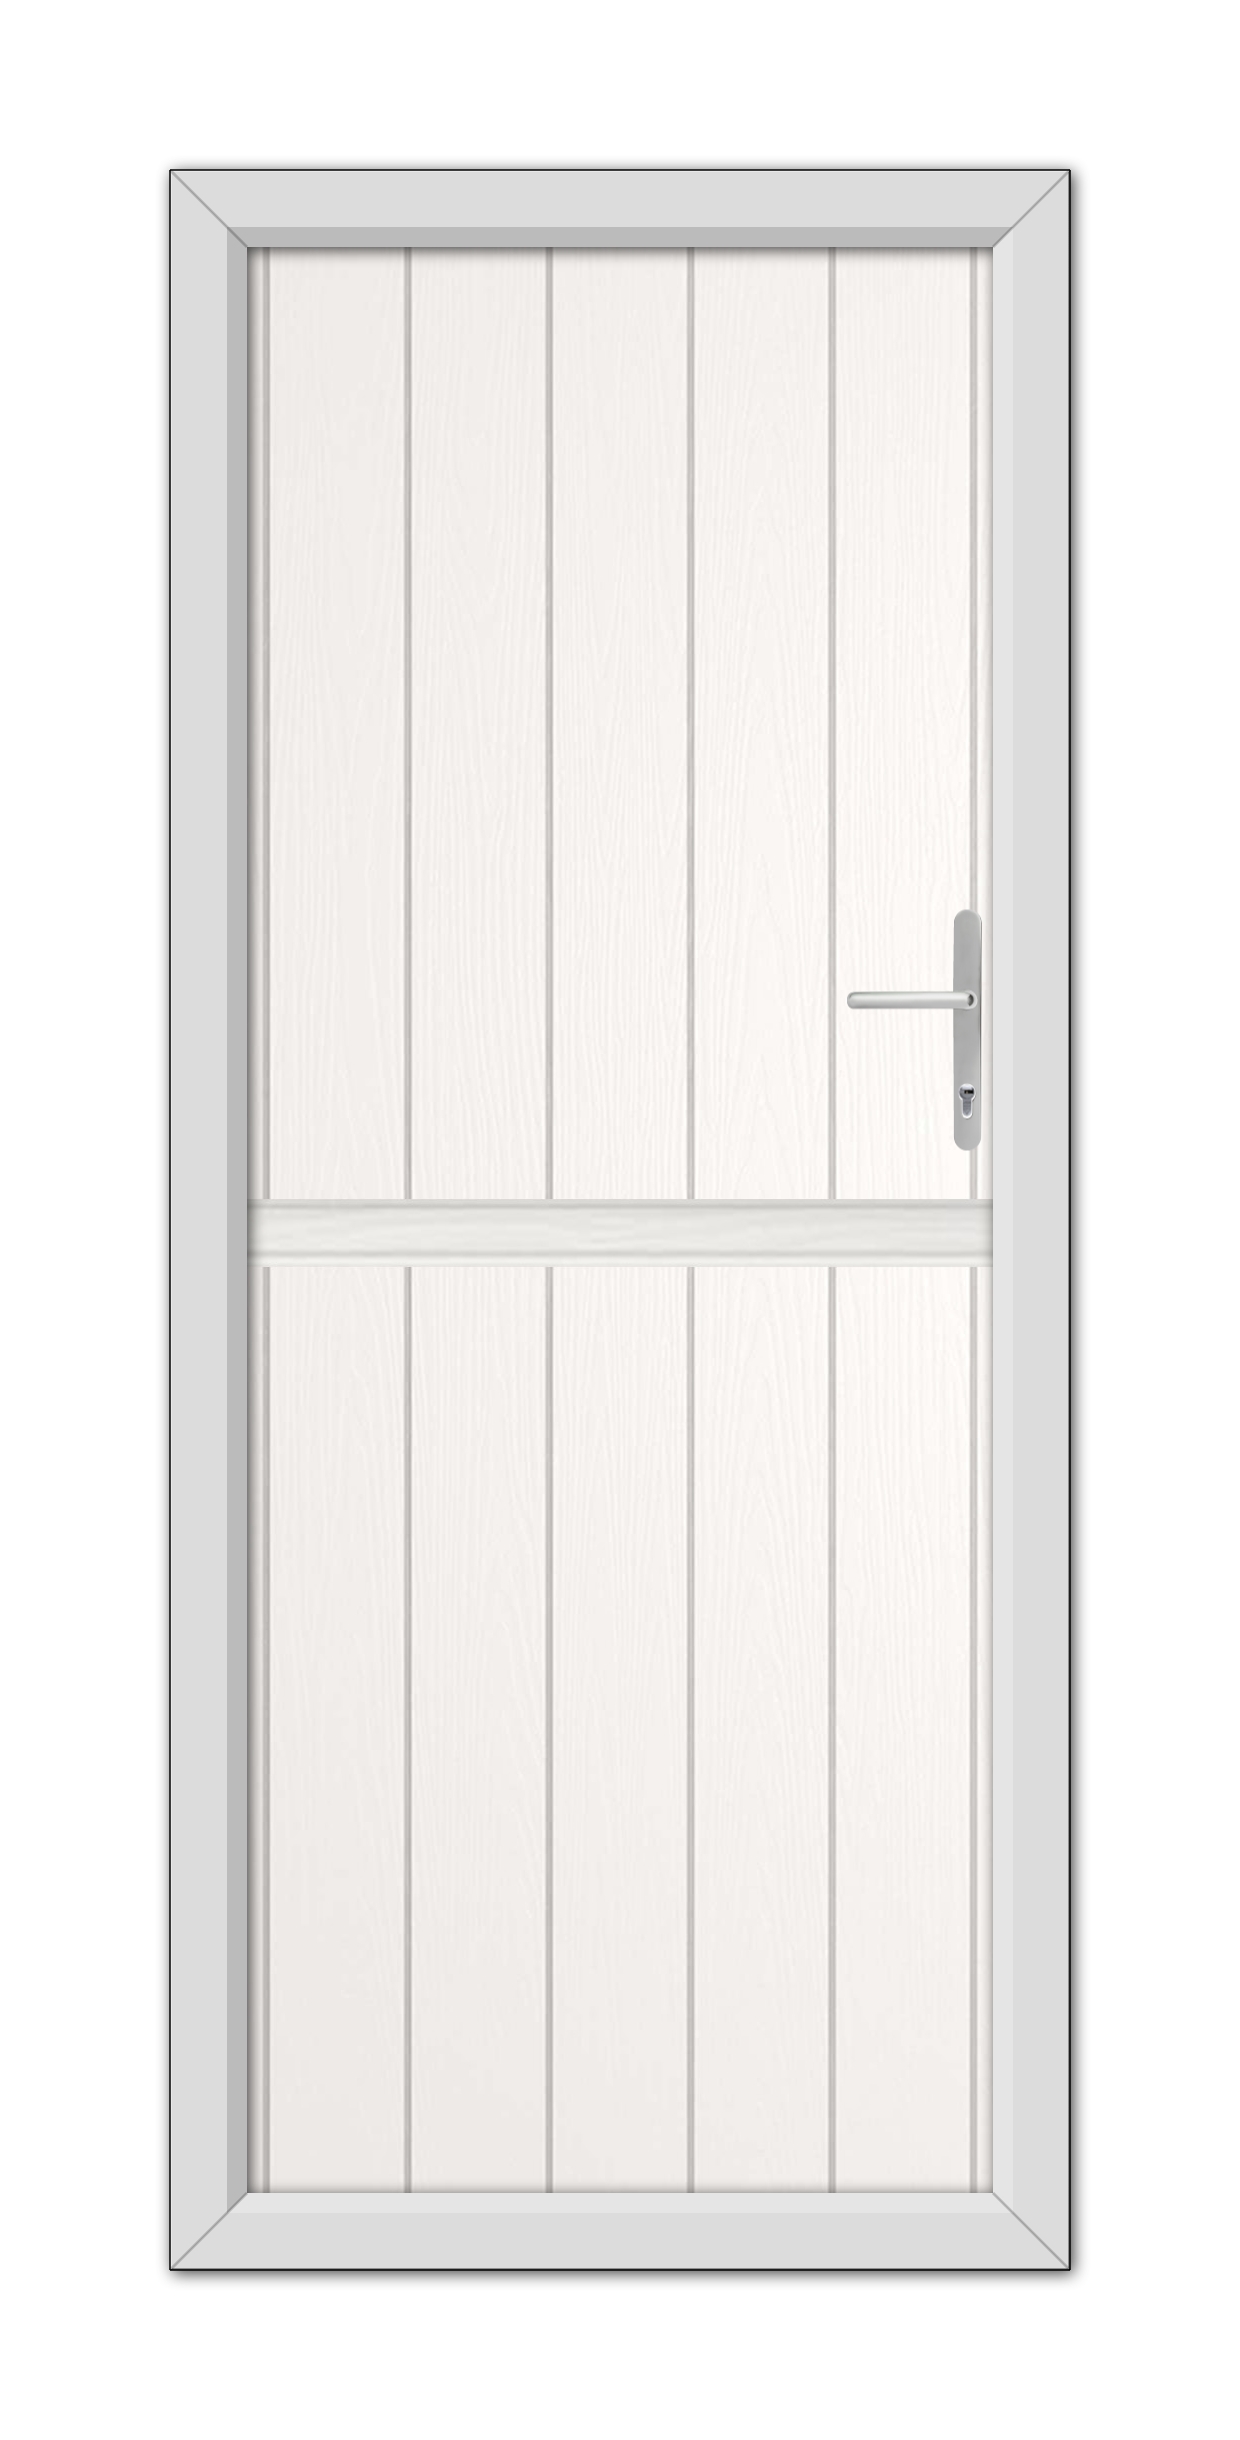 A closed White Norfolk Solid Stable Composite Door 48mm Timber Core with a horizontal window in the upper half, featuring a silver handle, set within a gray door frame.